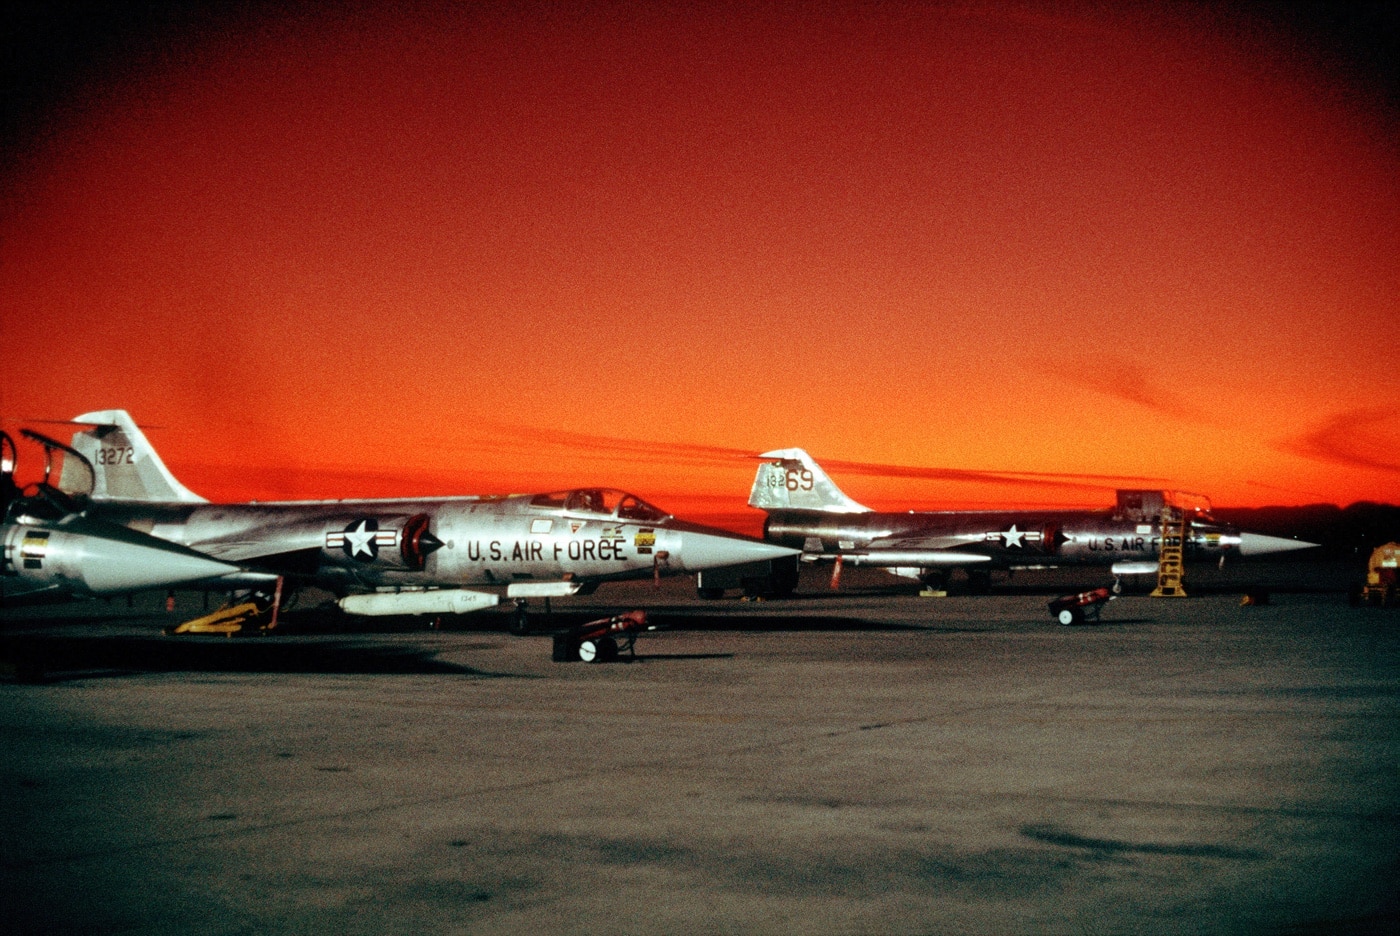 In this photo we see several F-104G fighters parked on the flight line at sunset.  The Lockheed F-104 Starfighter is an American single-engine, supersonic interceptor which was extensively deployed as a fighter-bomber during the Cold War.